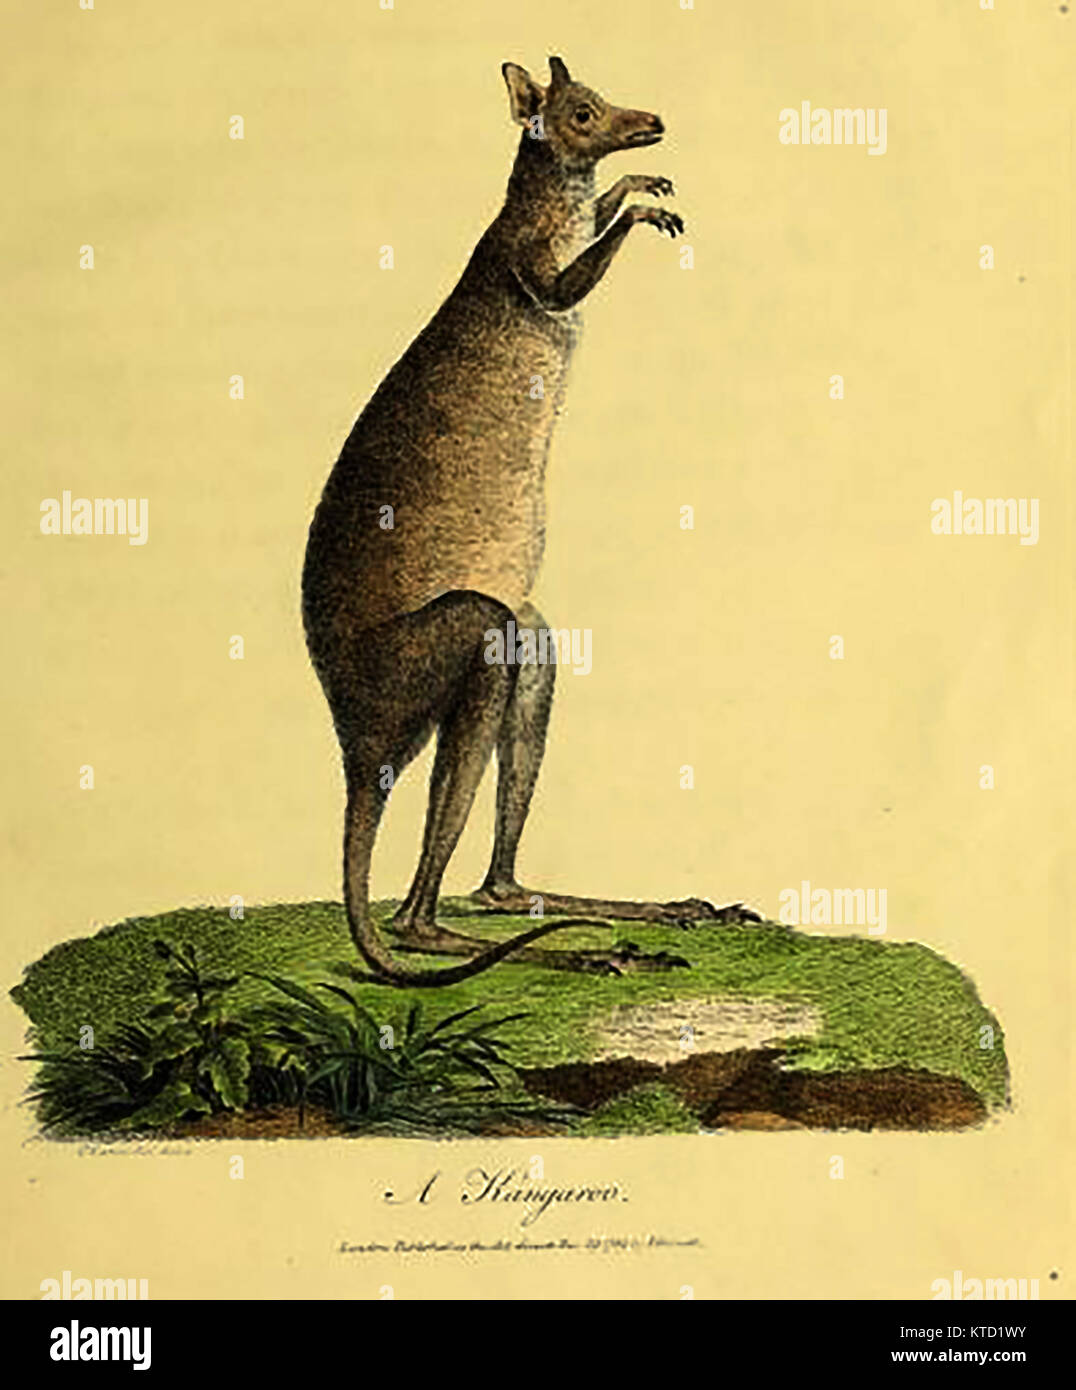 Australian wildlife - Kangaroo - (from ' Journal of a voyage to New South Wales...' )  by John White 1790 Stock Photo